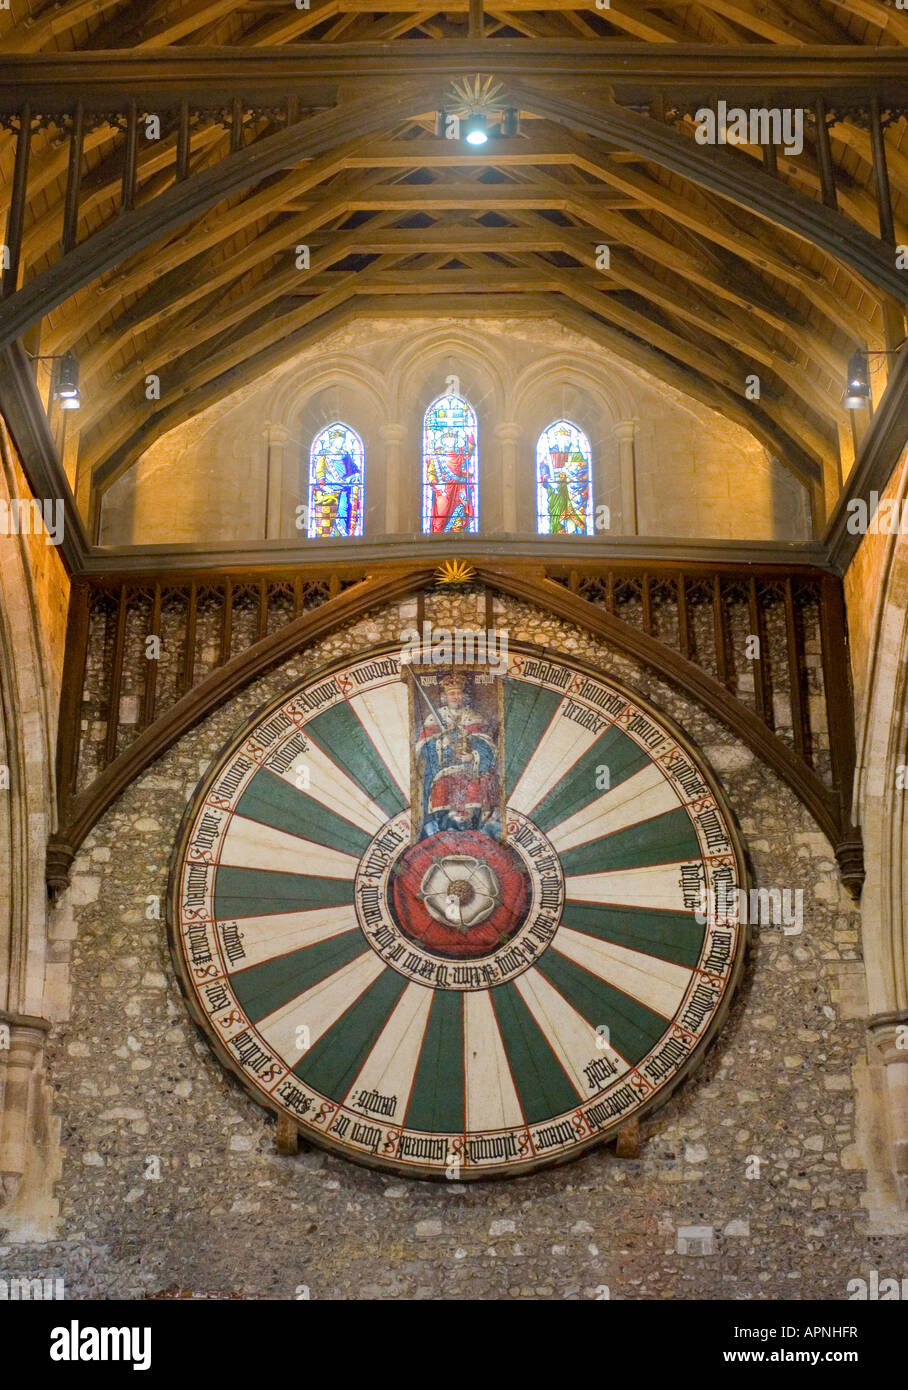 King Arthur's round table at Winchester Great Hall Stock Photo